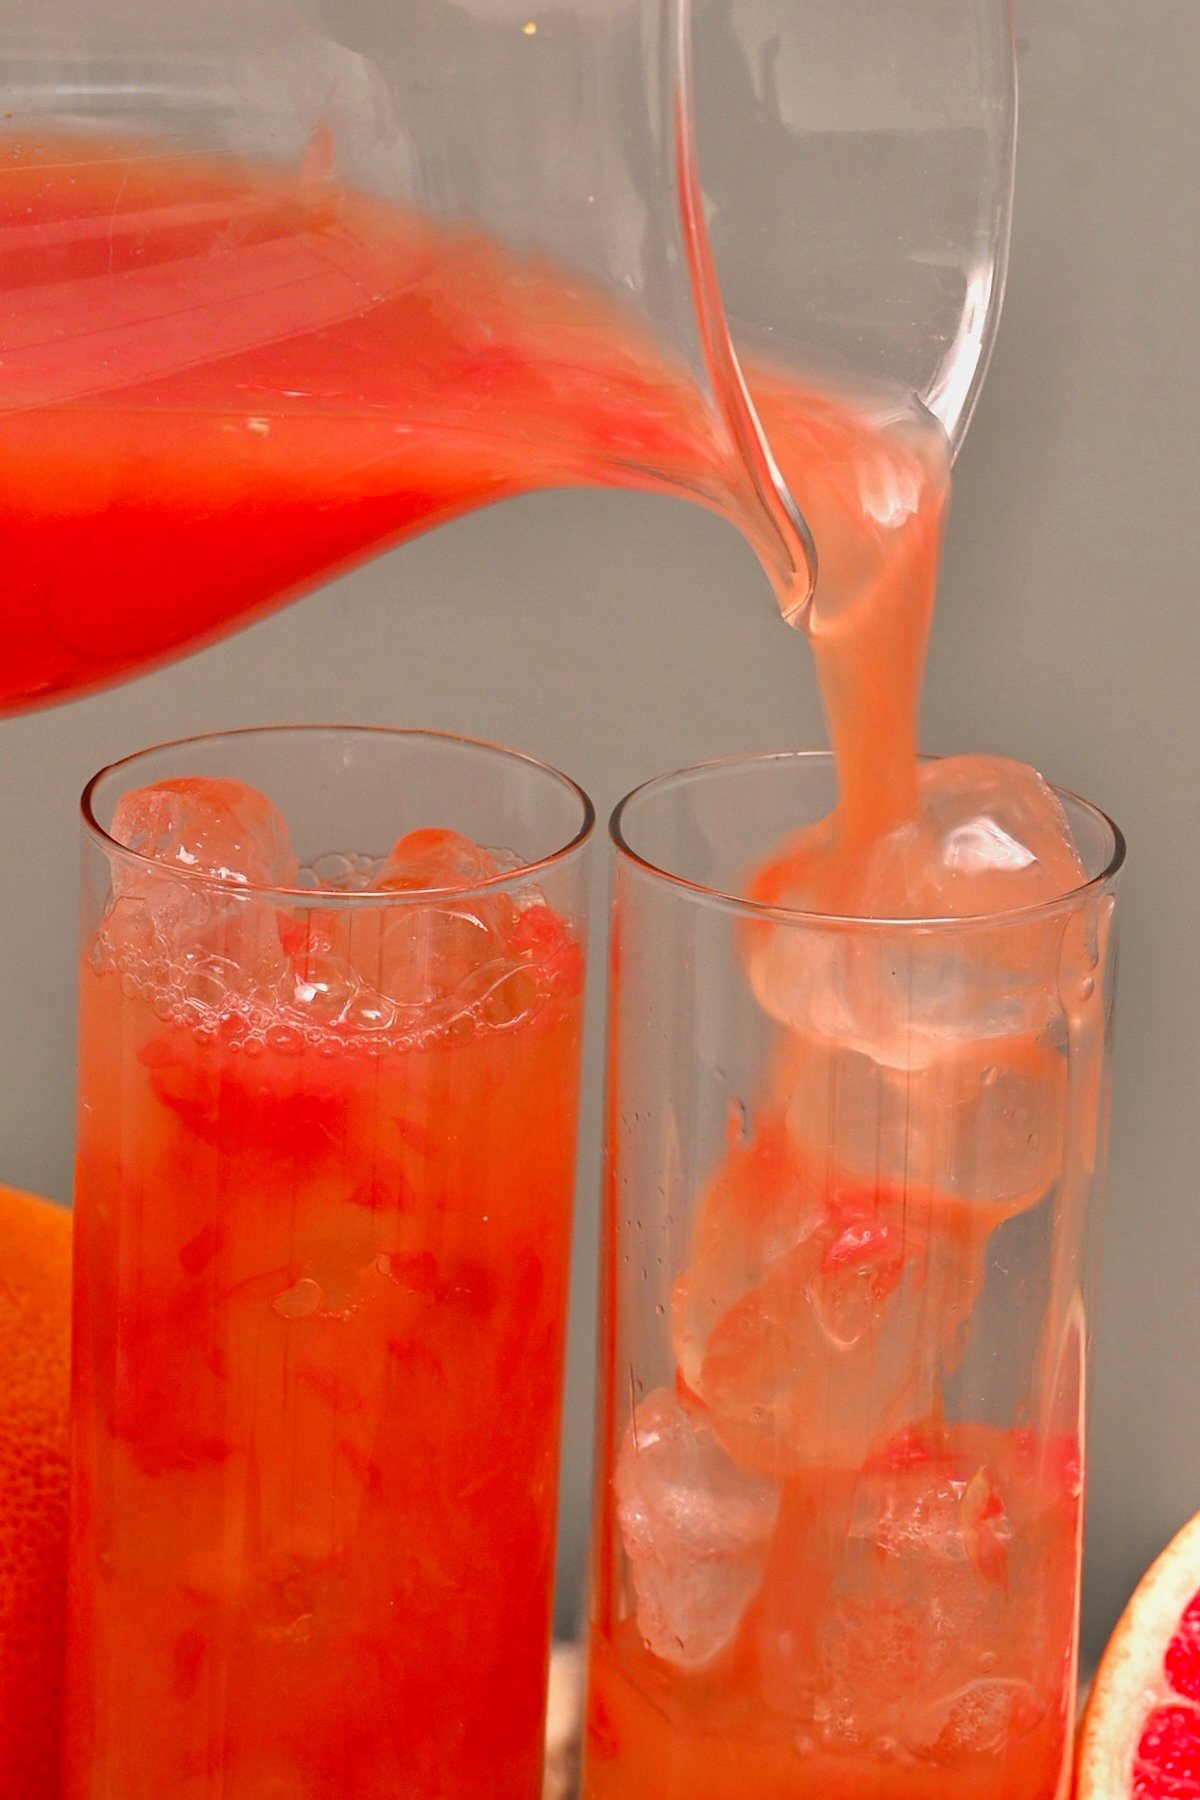 Pouring grapefruit juice into a glass with ice cubes